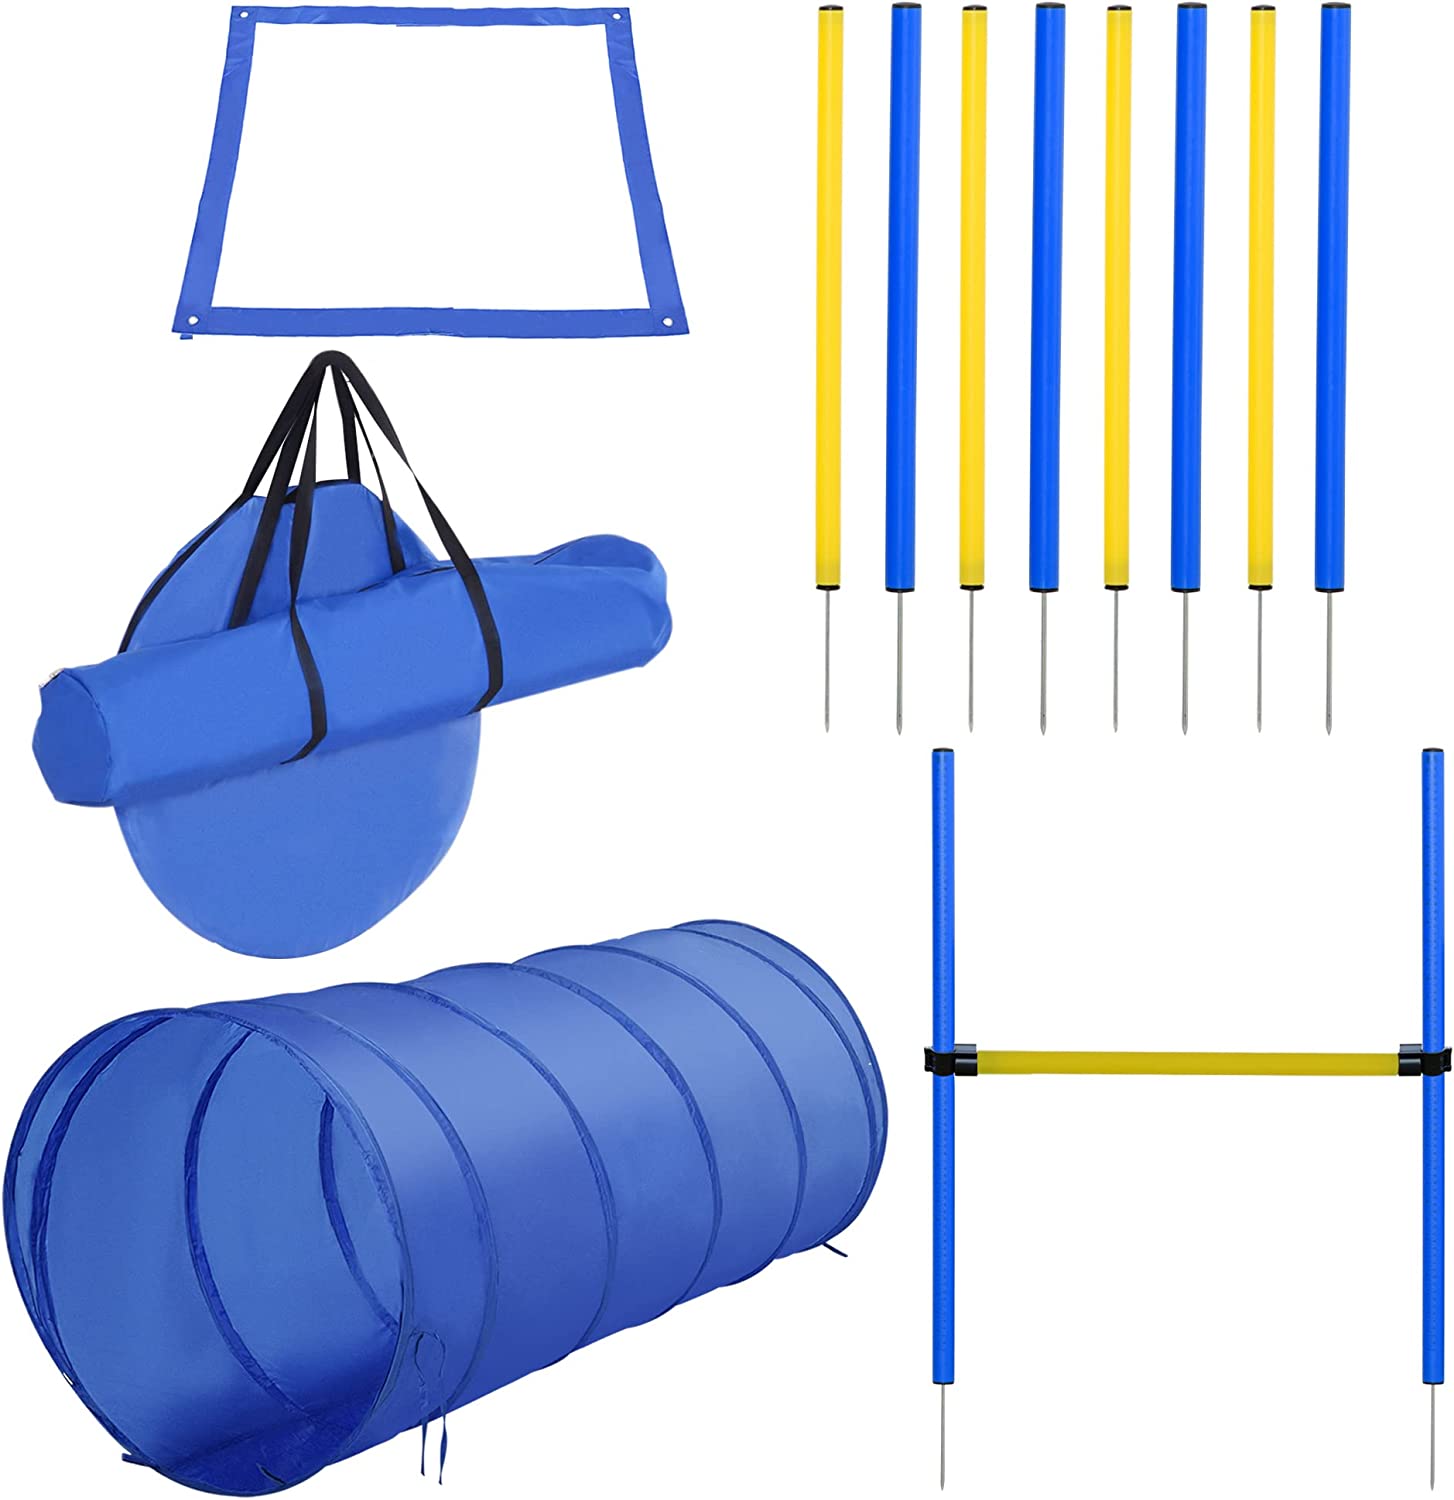 Pawhut 4PC Obstacle Dog Agility Training Course Kit Backyard Competitive Equipment- Blue, Yellow - image 1 of 9